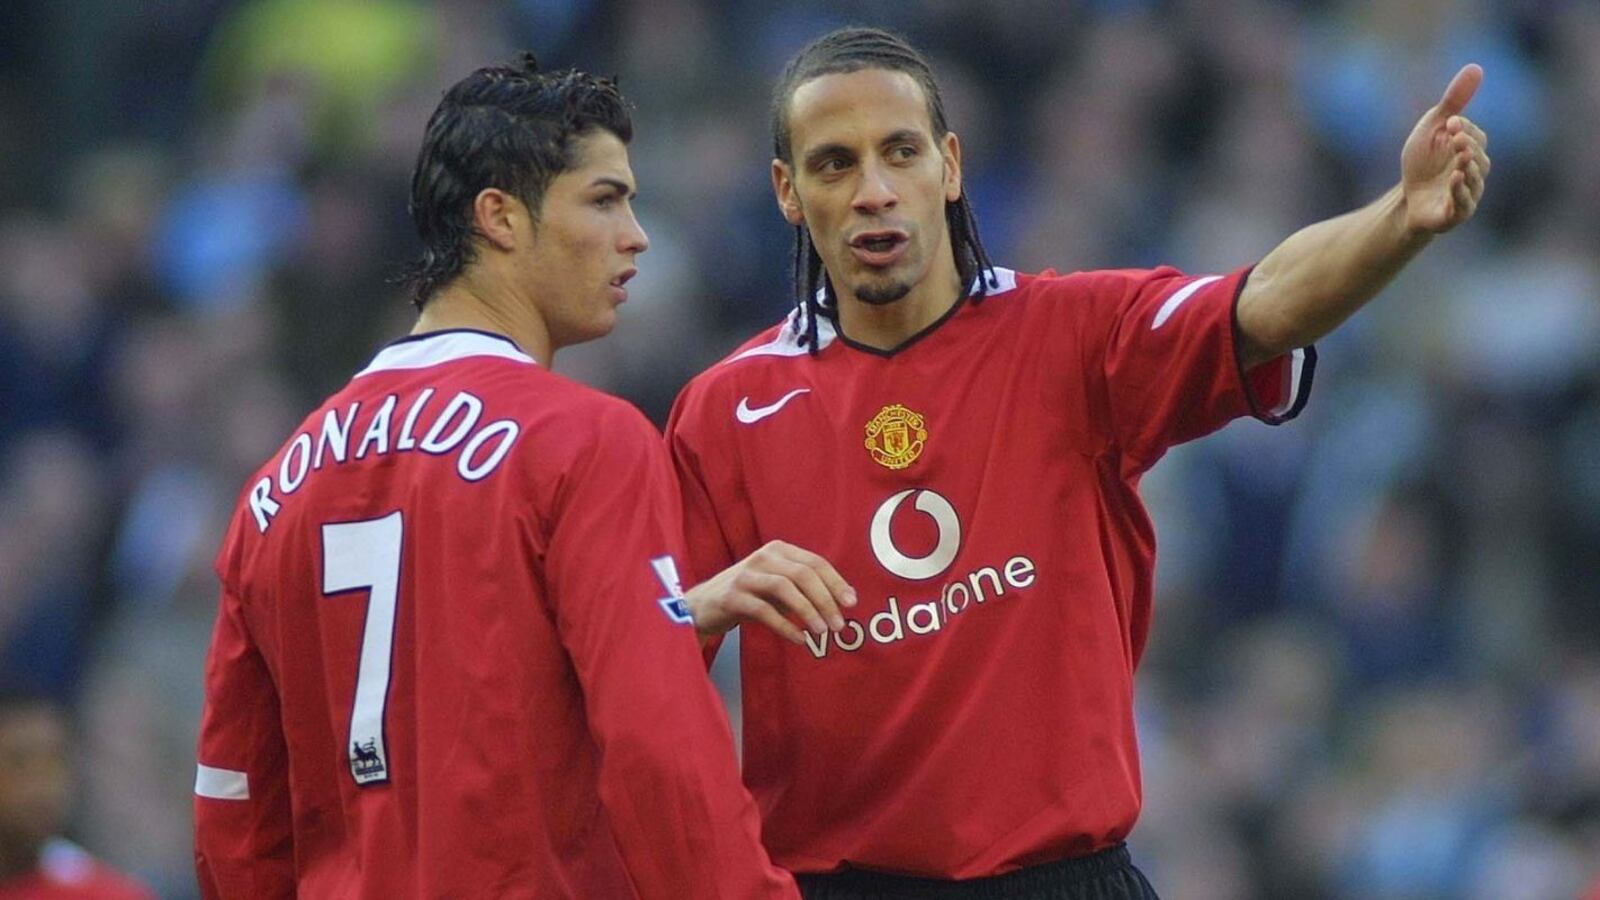 Not Cristiano Ronaldo, Rio Ferdinand picks the best striker he played with at Manchester United